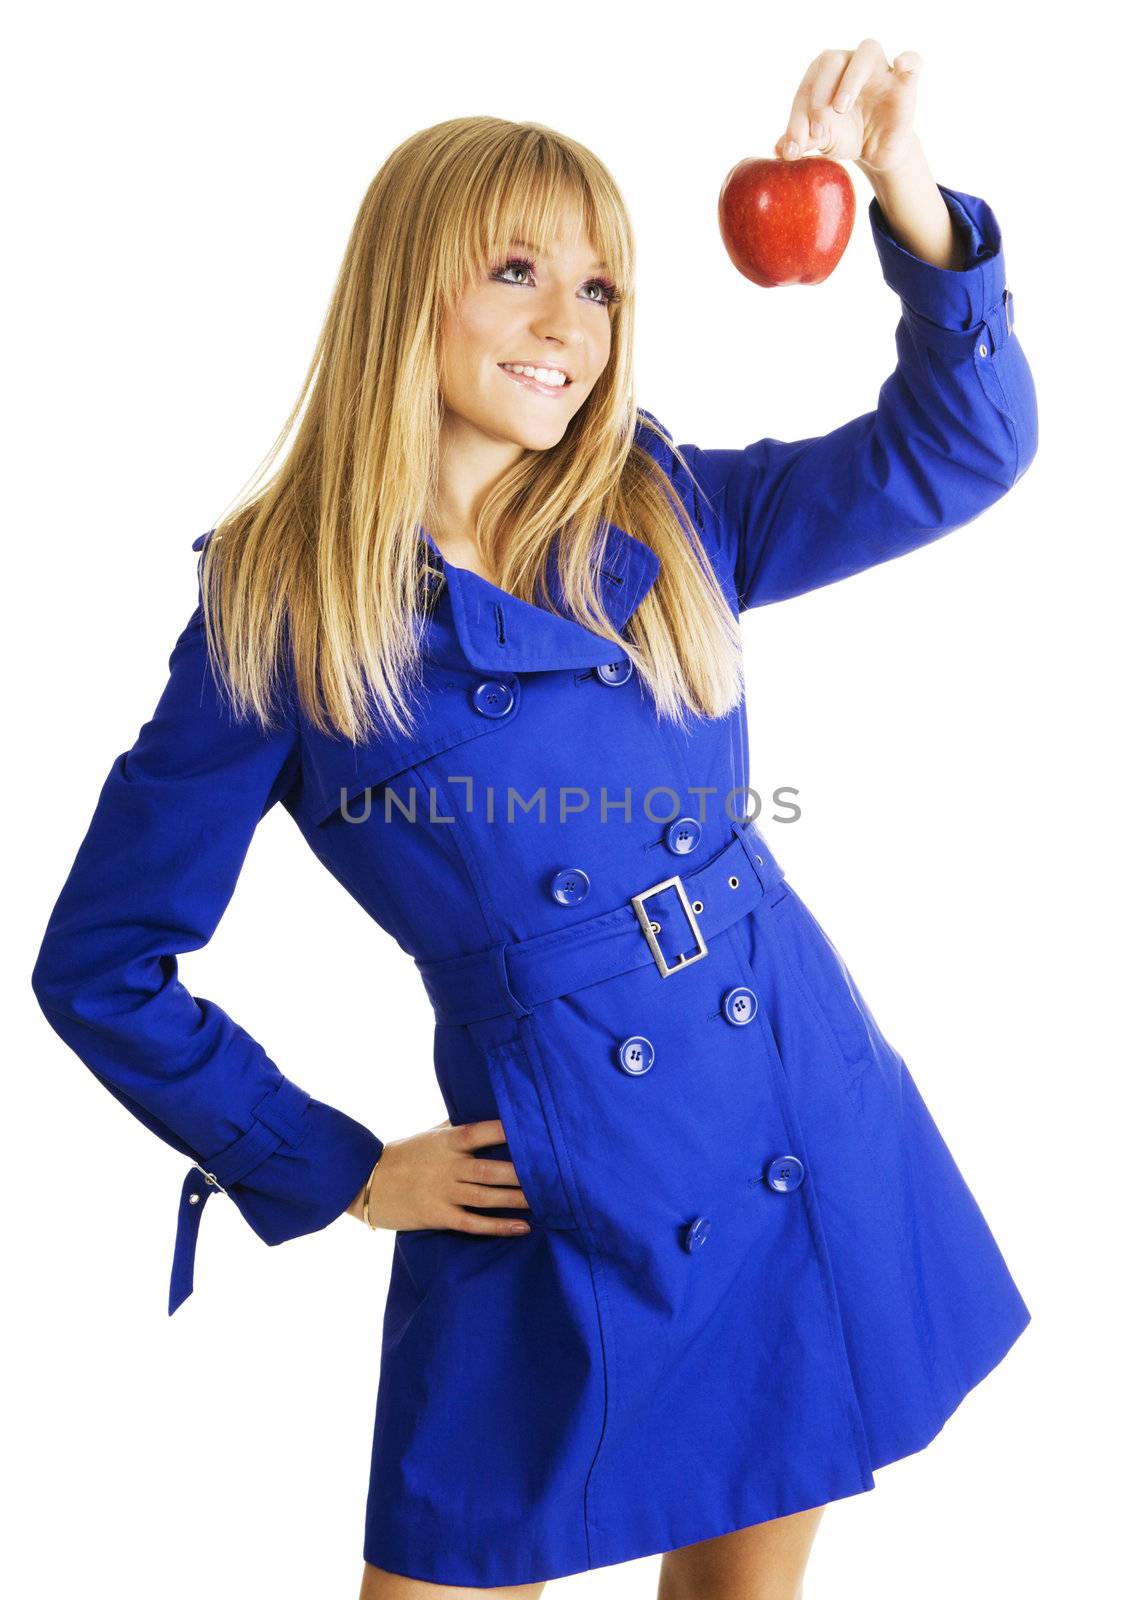 Young woman in blue autumn coat holding a red apple